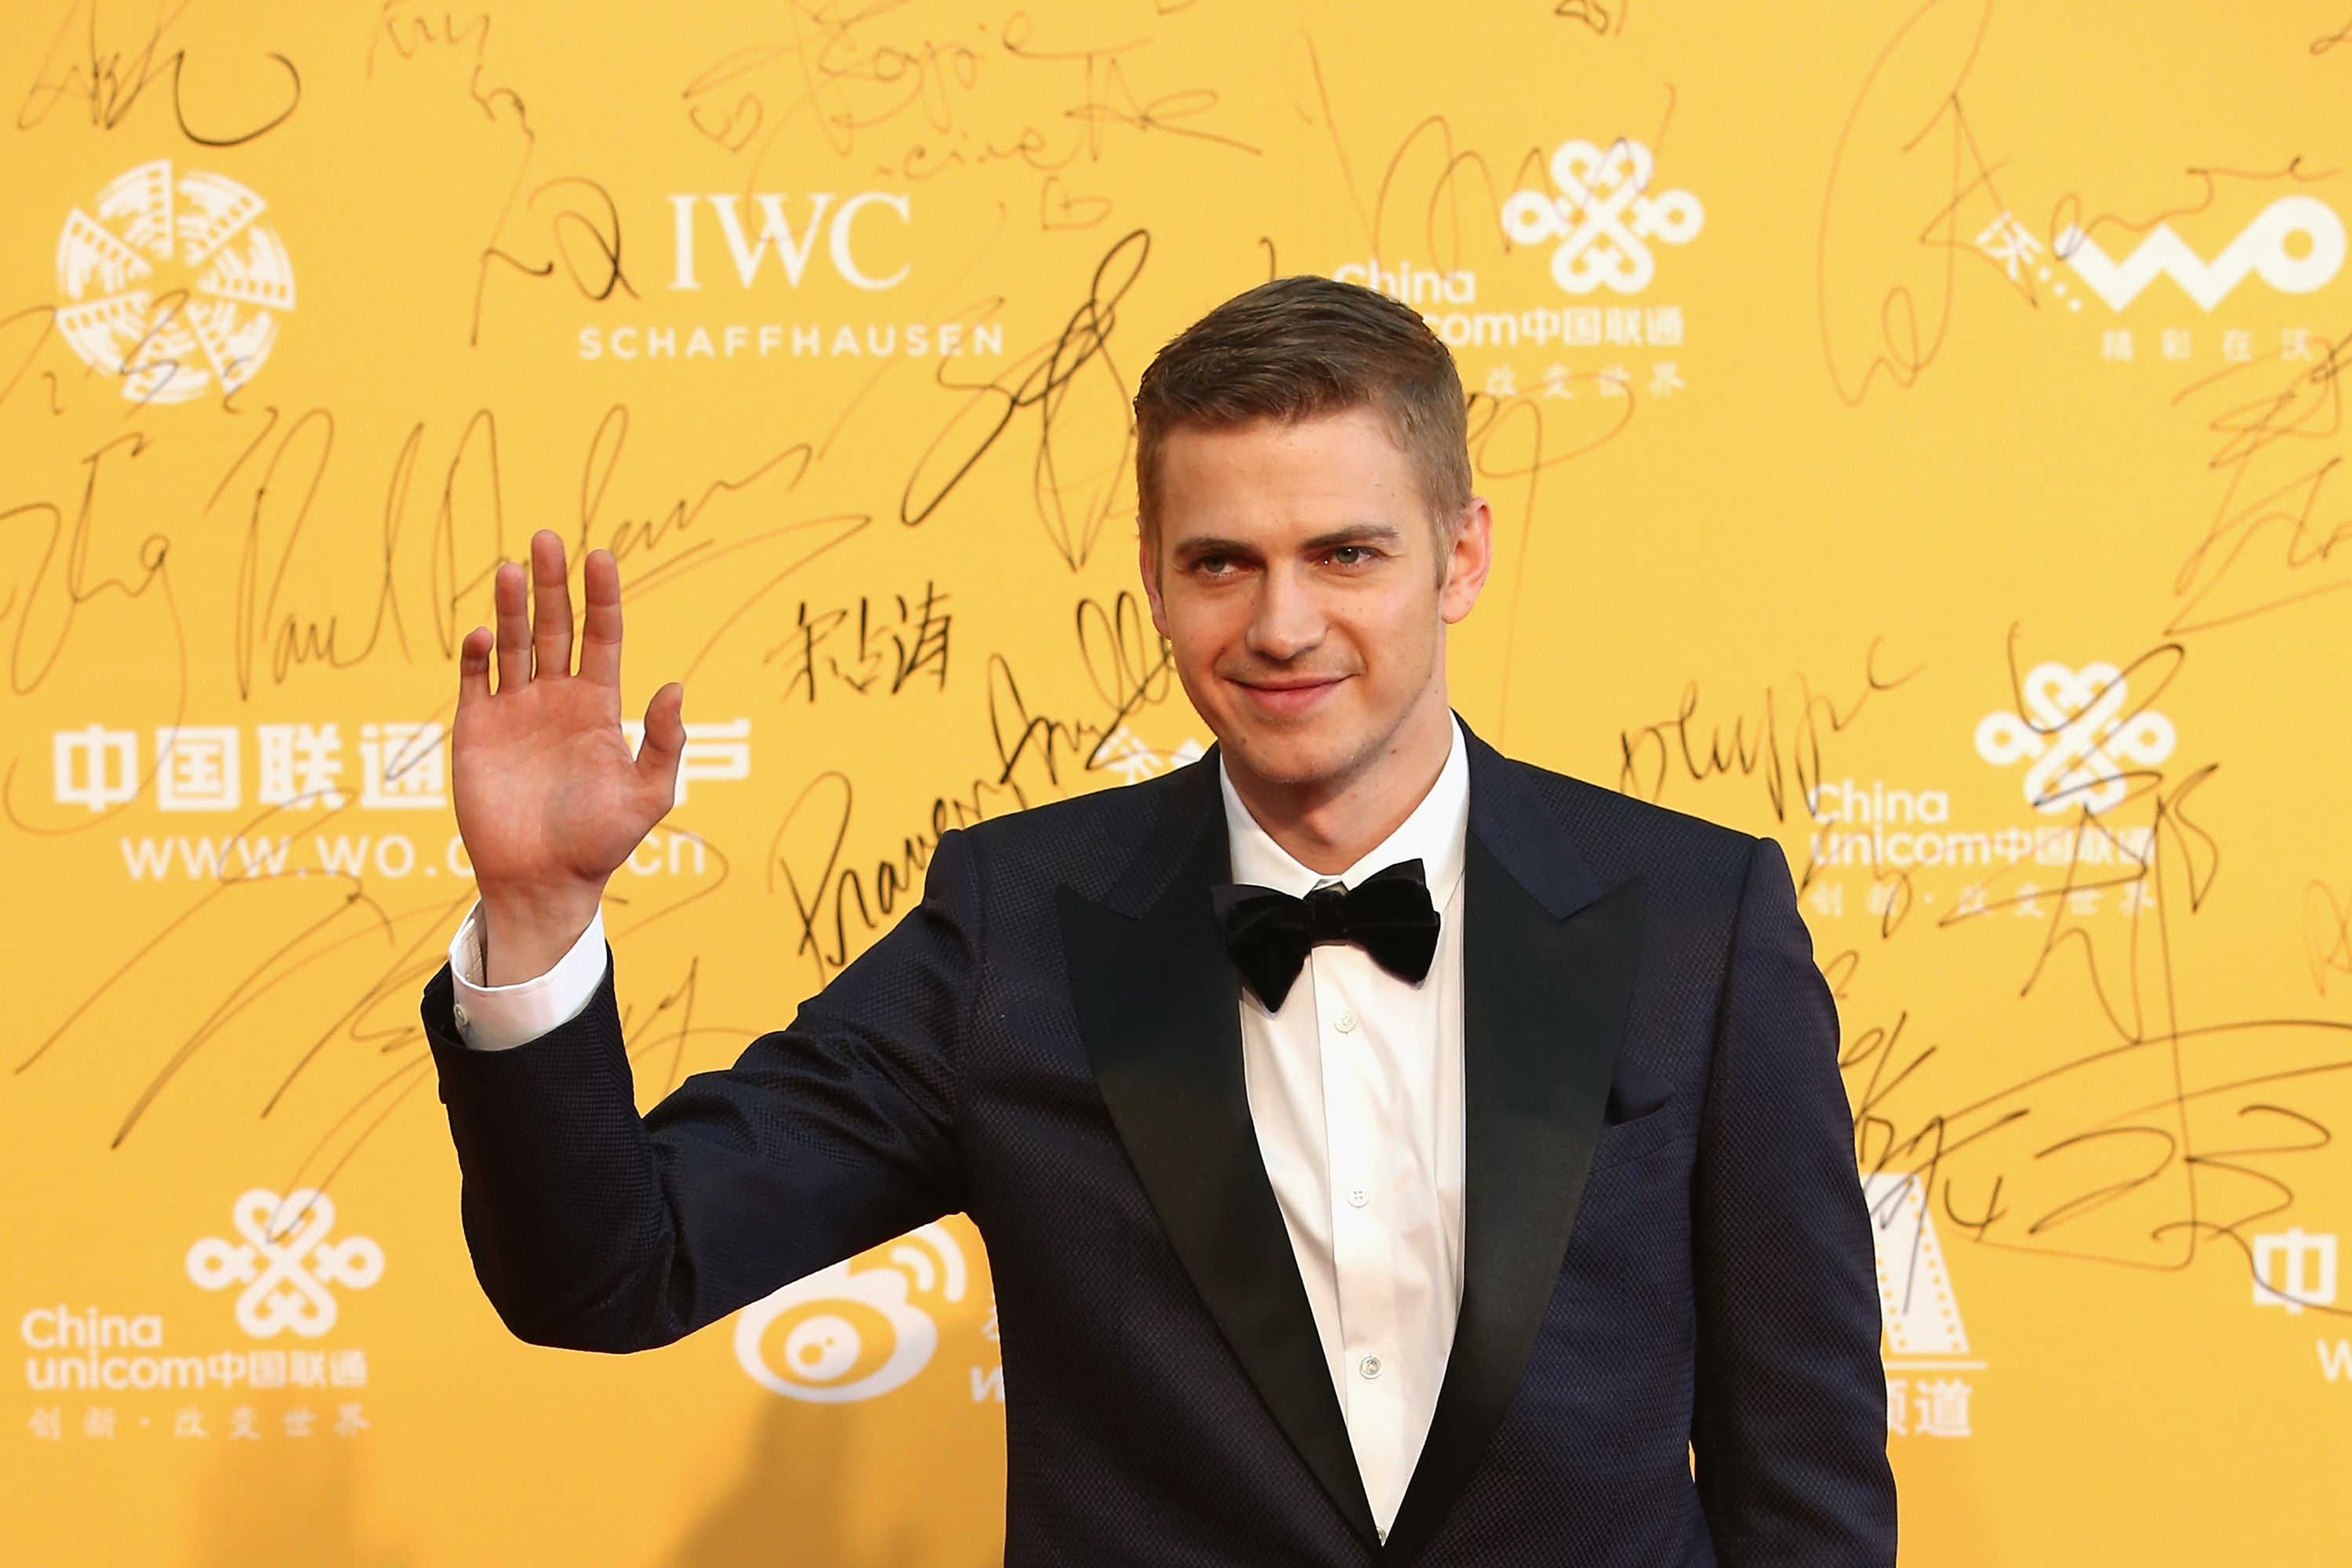 Hayden Christensen during the 4th Beijing International Film Festival at China's National Grand Theater on April 16, 2014 in Beijing, China | Source: Getty Images